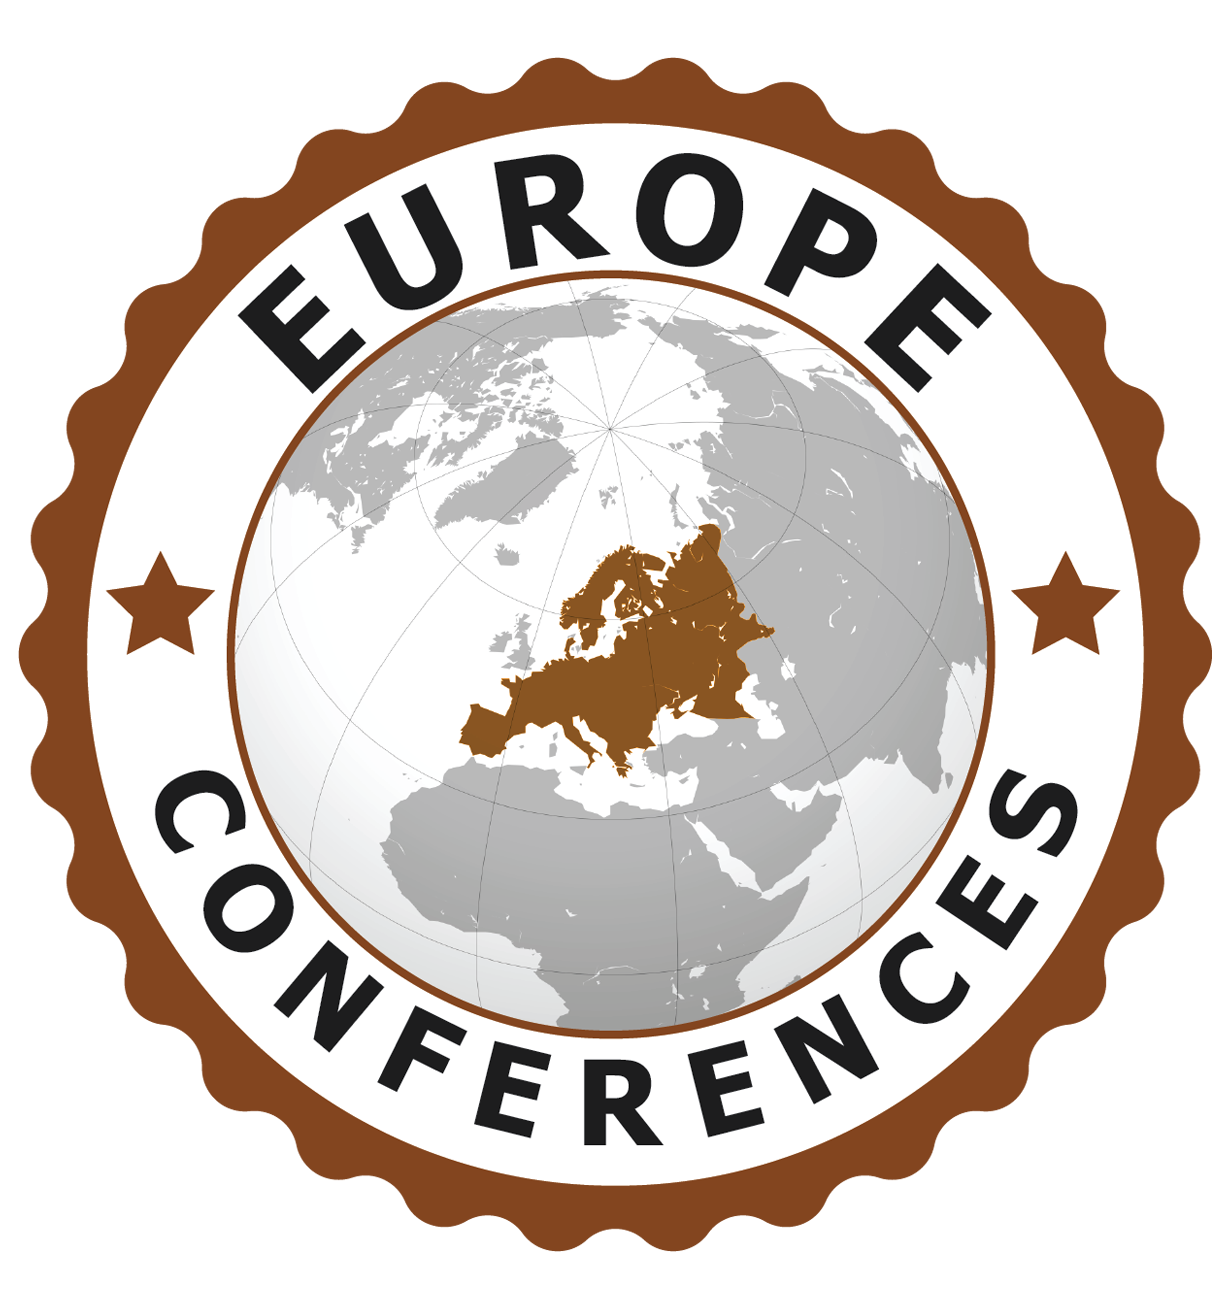 Europe conferences home international. Disease clipart toxicologist